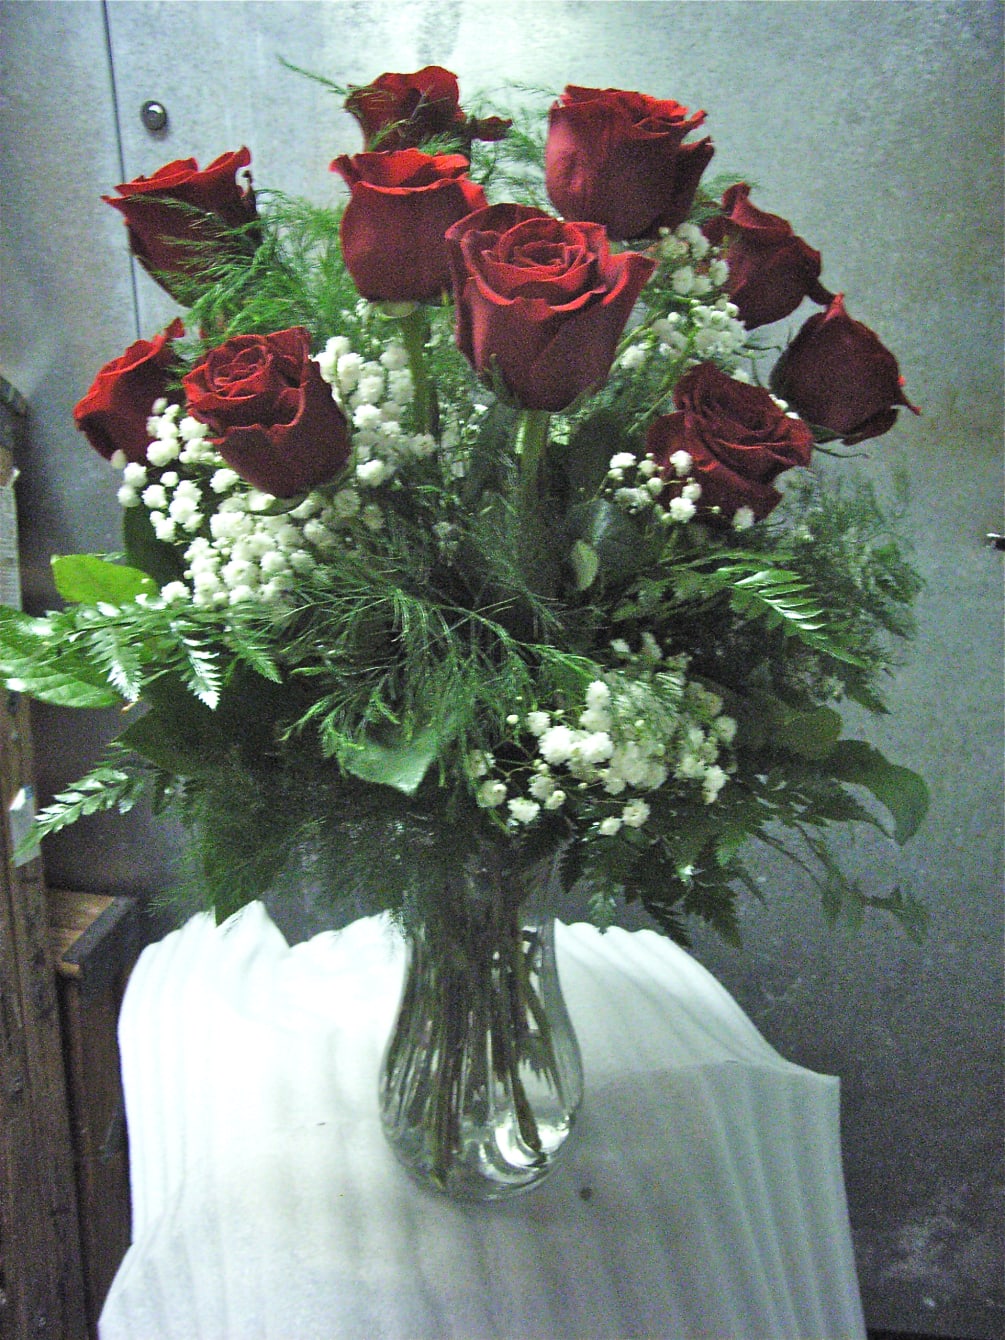 One dozen velvety deep red roses arranged in a vase with greenery